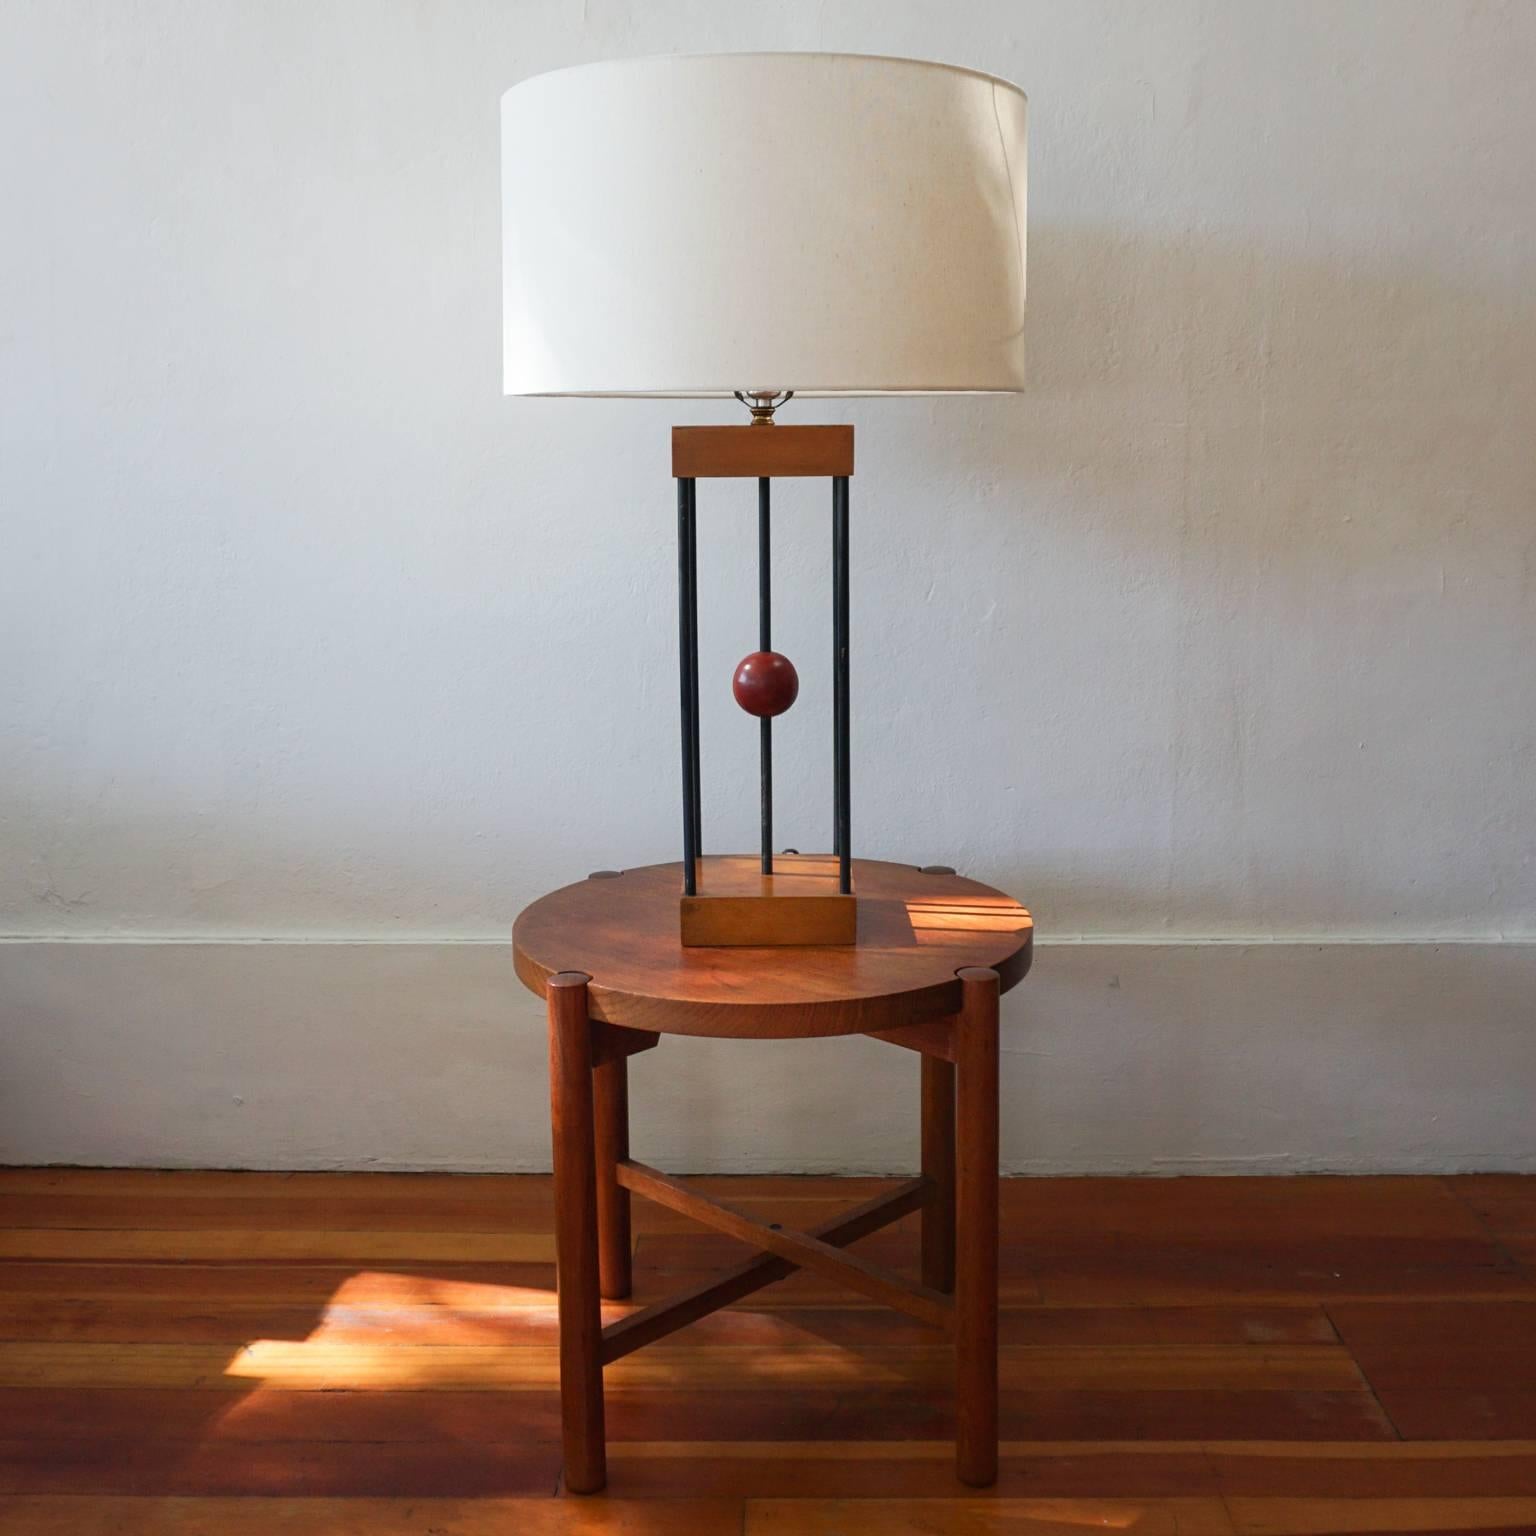 Wood and iron lamp by Albert Blake. Architectural and simple design with modest materials from the early 1950s. 

After serving in the Army, Blake moved from the midwest to California and worked as a scene designer. He then moved into full-time